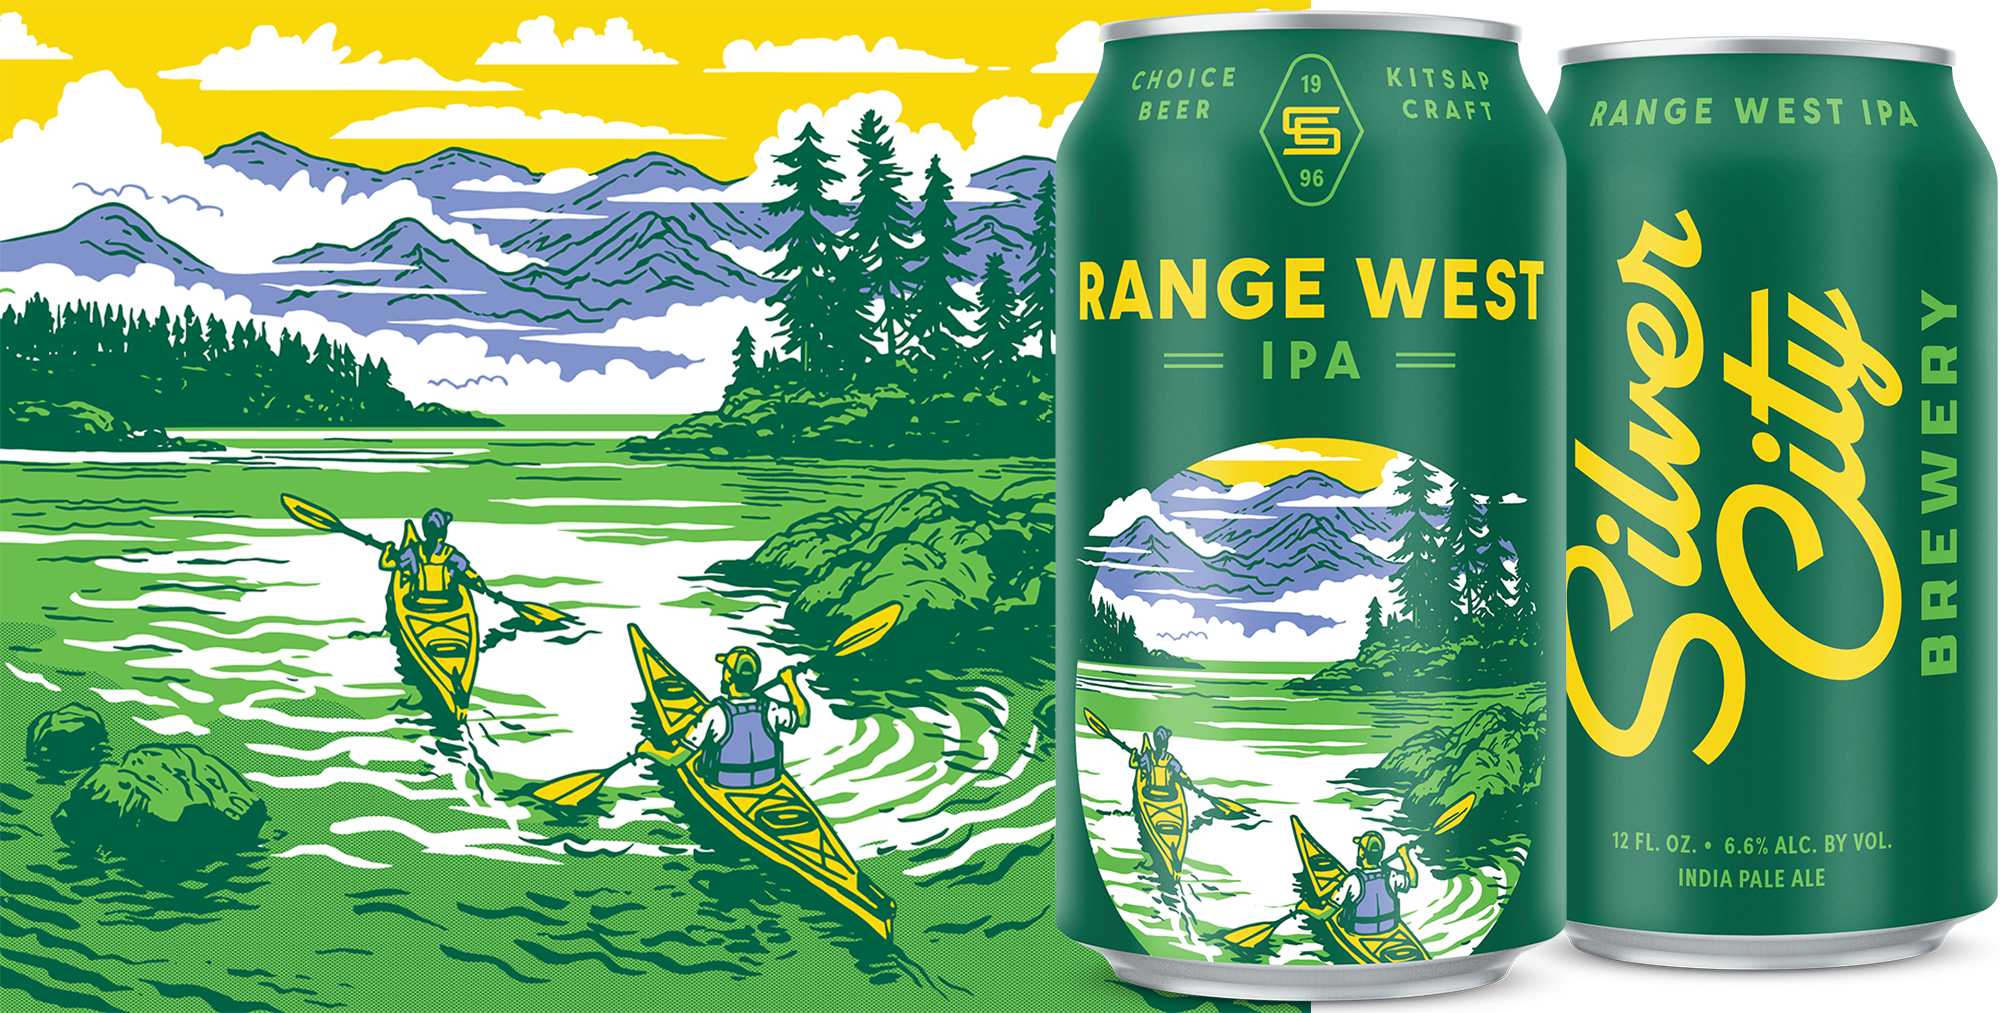 Silver City Brewery Range West IPA